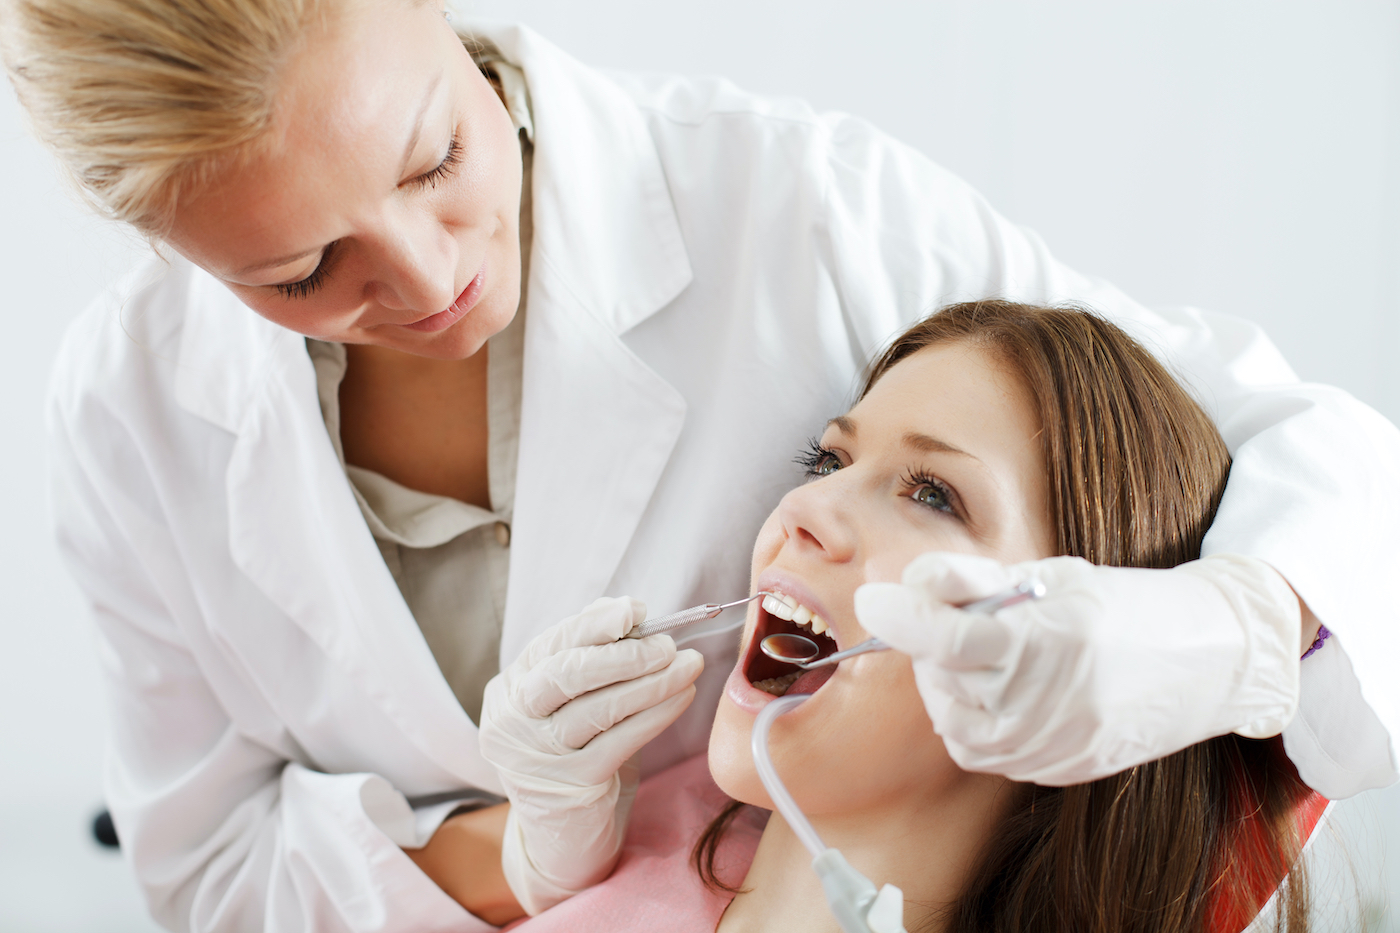 How Important is it to Get a Teeth Cleaning With Our Southwest Houston Dentist?